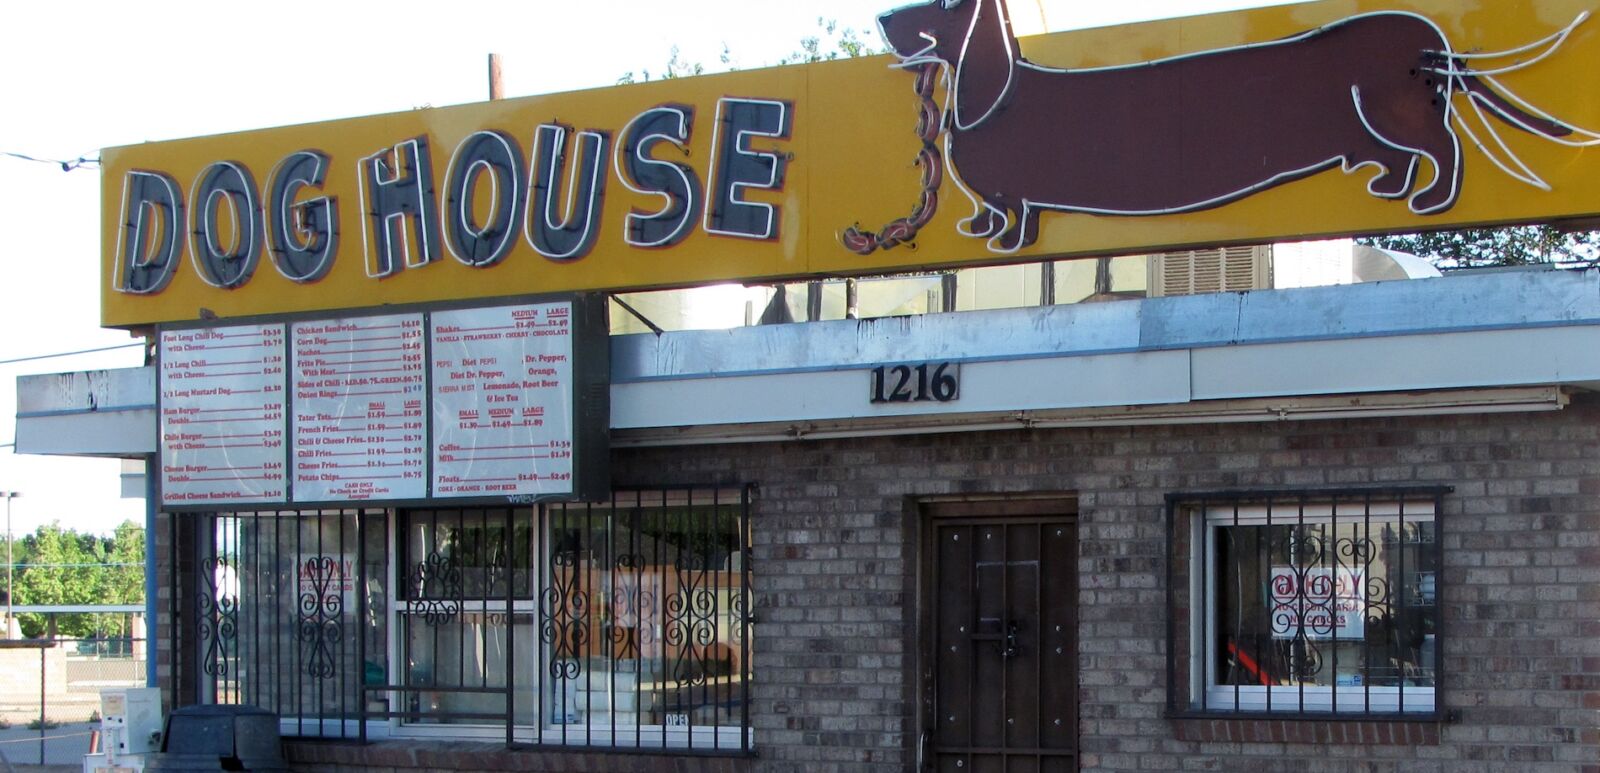 ALBUQUERQUE, NEW MEXICO, USA - May 22, 2014: The Dog House Drive In restaurant. Familiar from TV series Breaking Bad and Better Call Saul. Photo via Shutterstock.